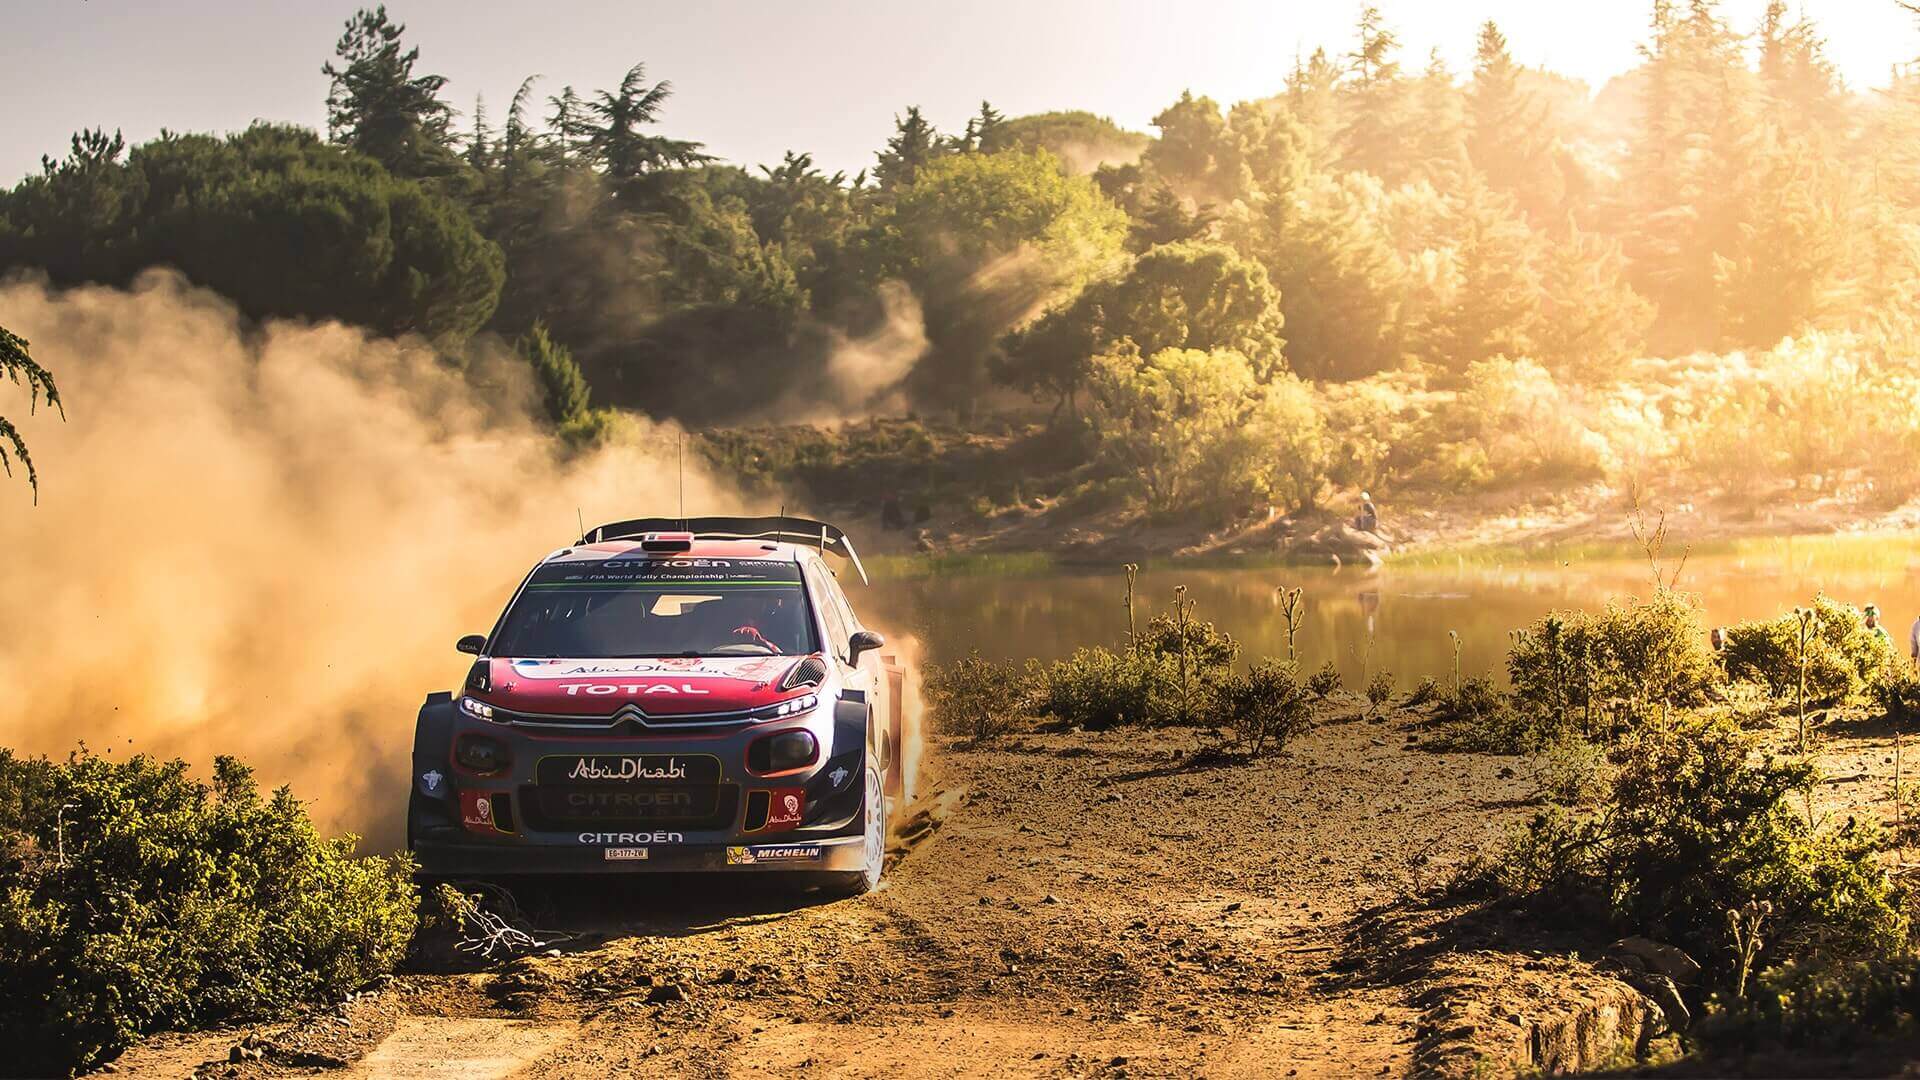 WRC+. Official Live Stream & Video Channel of